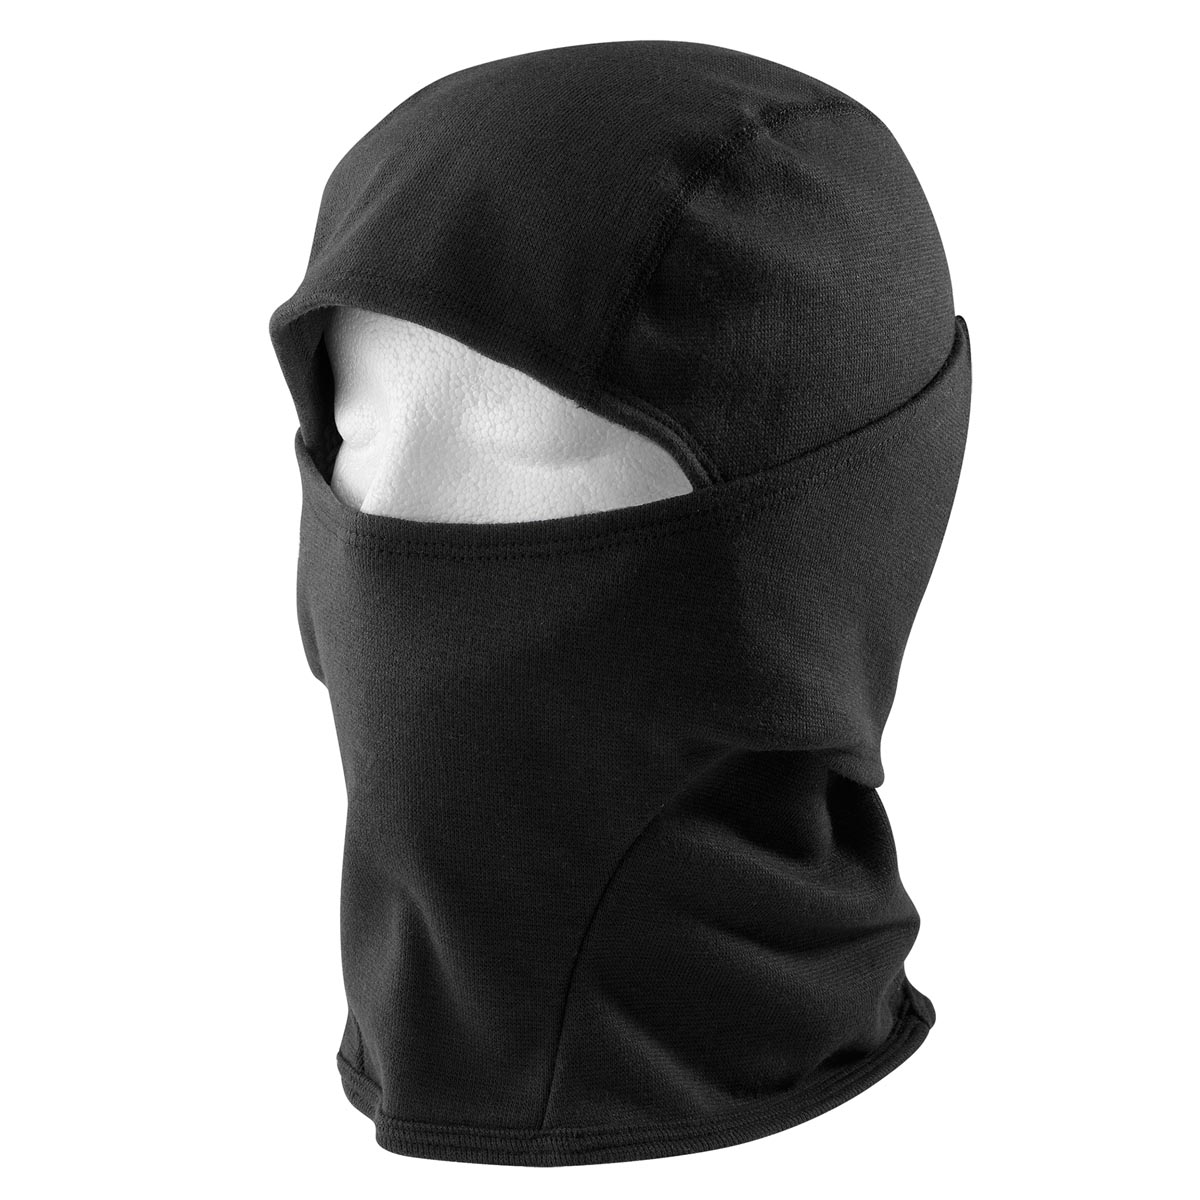 Carhartt Men's Flame Resistant Double Layer Work Dry Balaclava